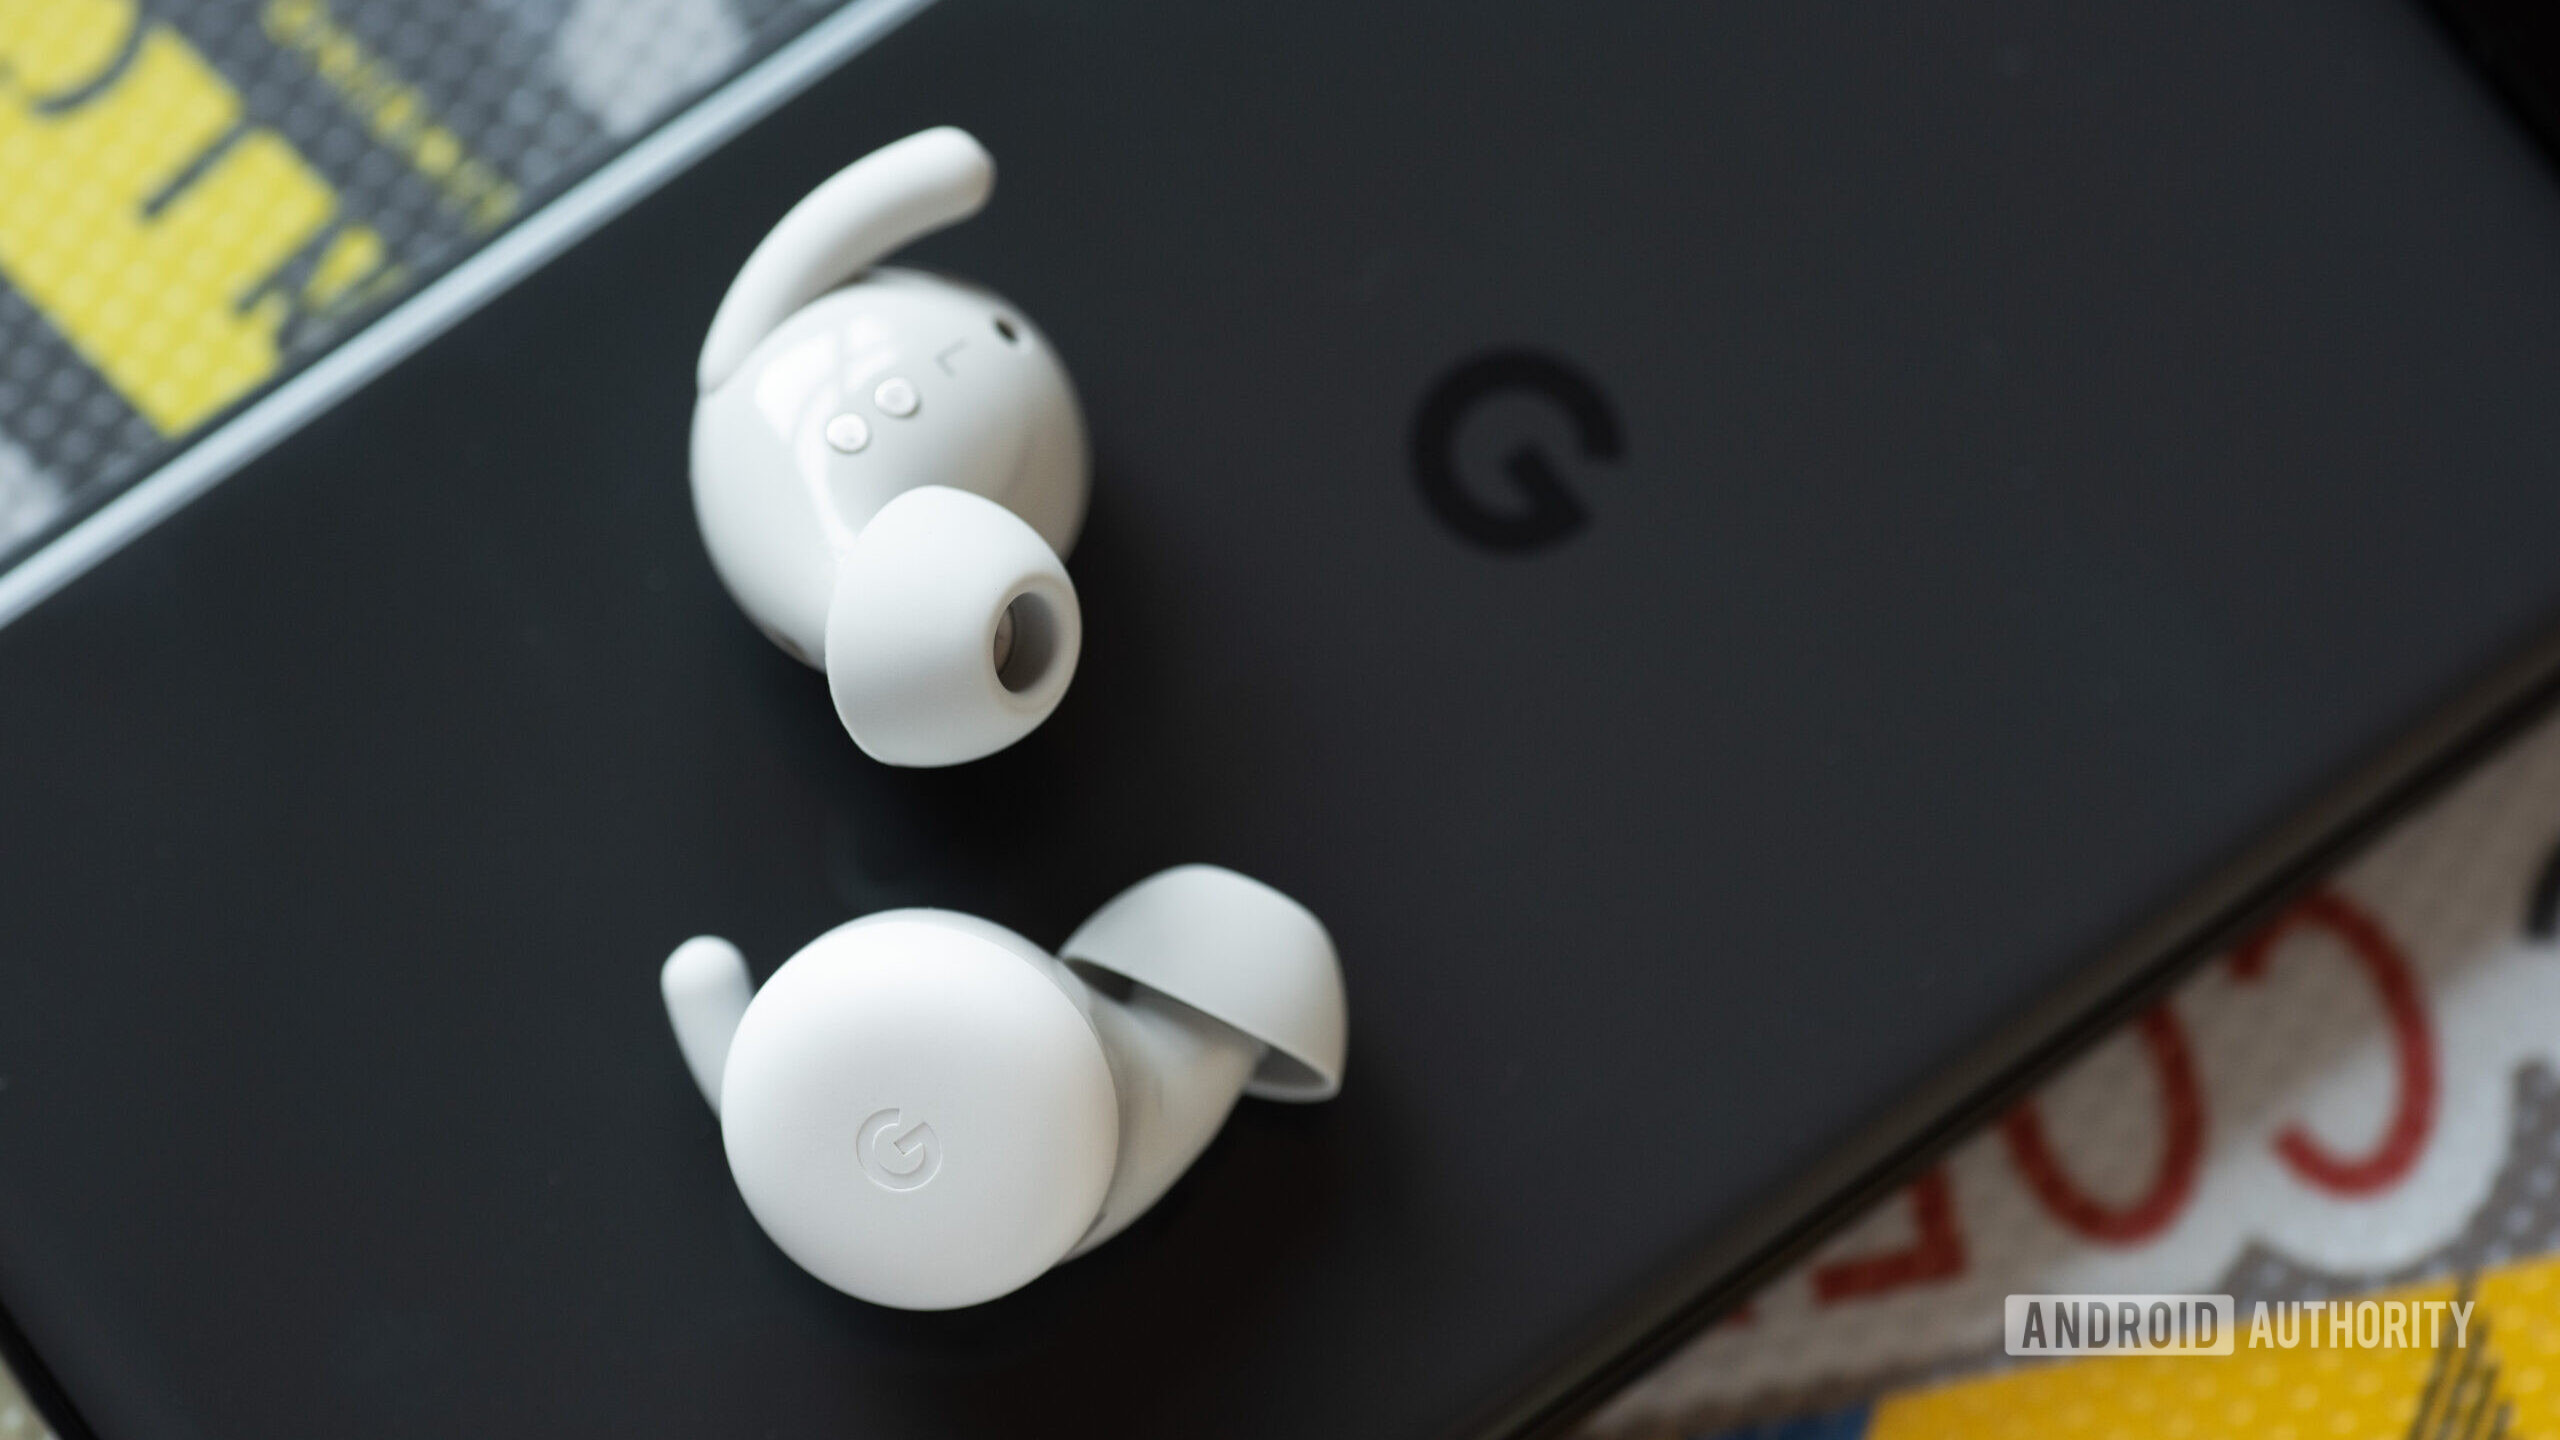 The Google Pixel Buds A-Series earbuds on a Pixel 6 phone.